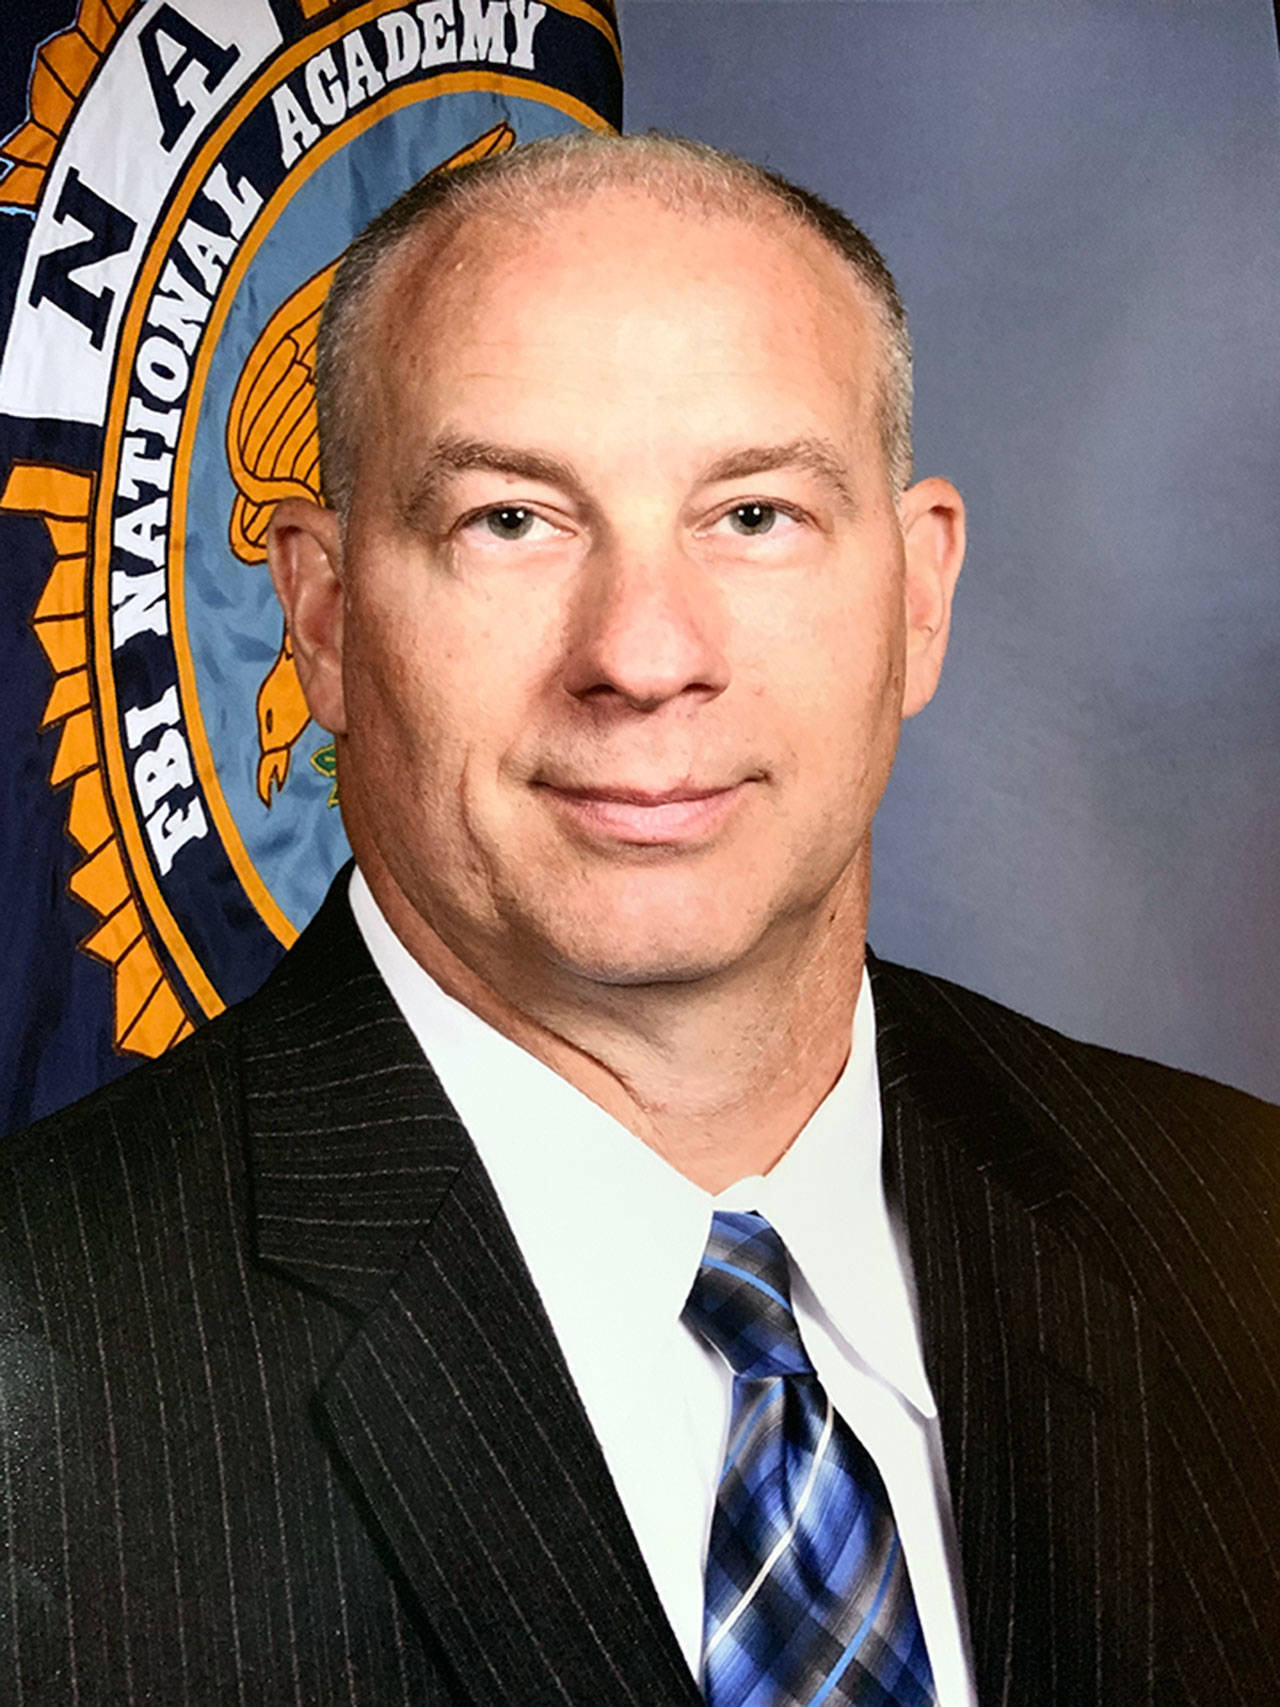 Thomas Olson has been selected as the new Port Townsend police chief. Currently the deputy police chief for the University of Washington police department, he will start his new position by May 3.